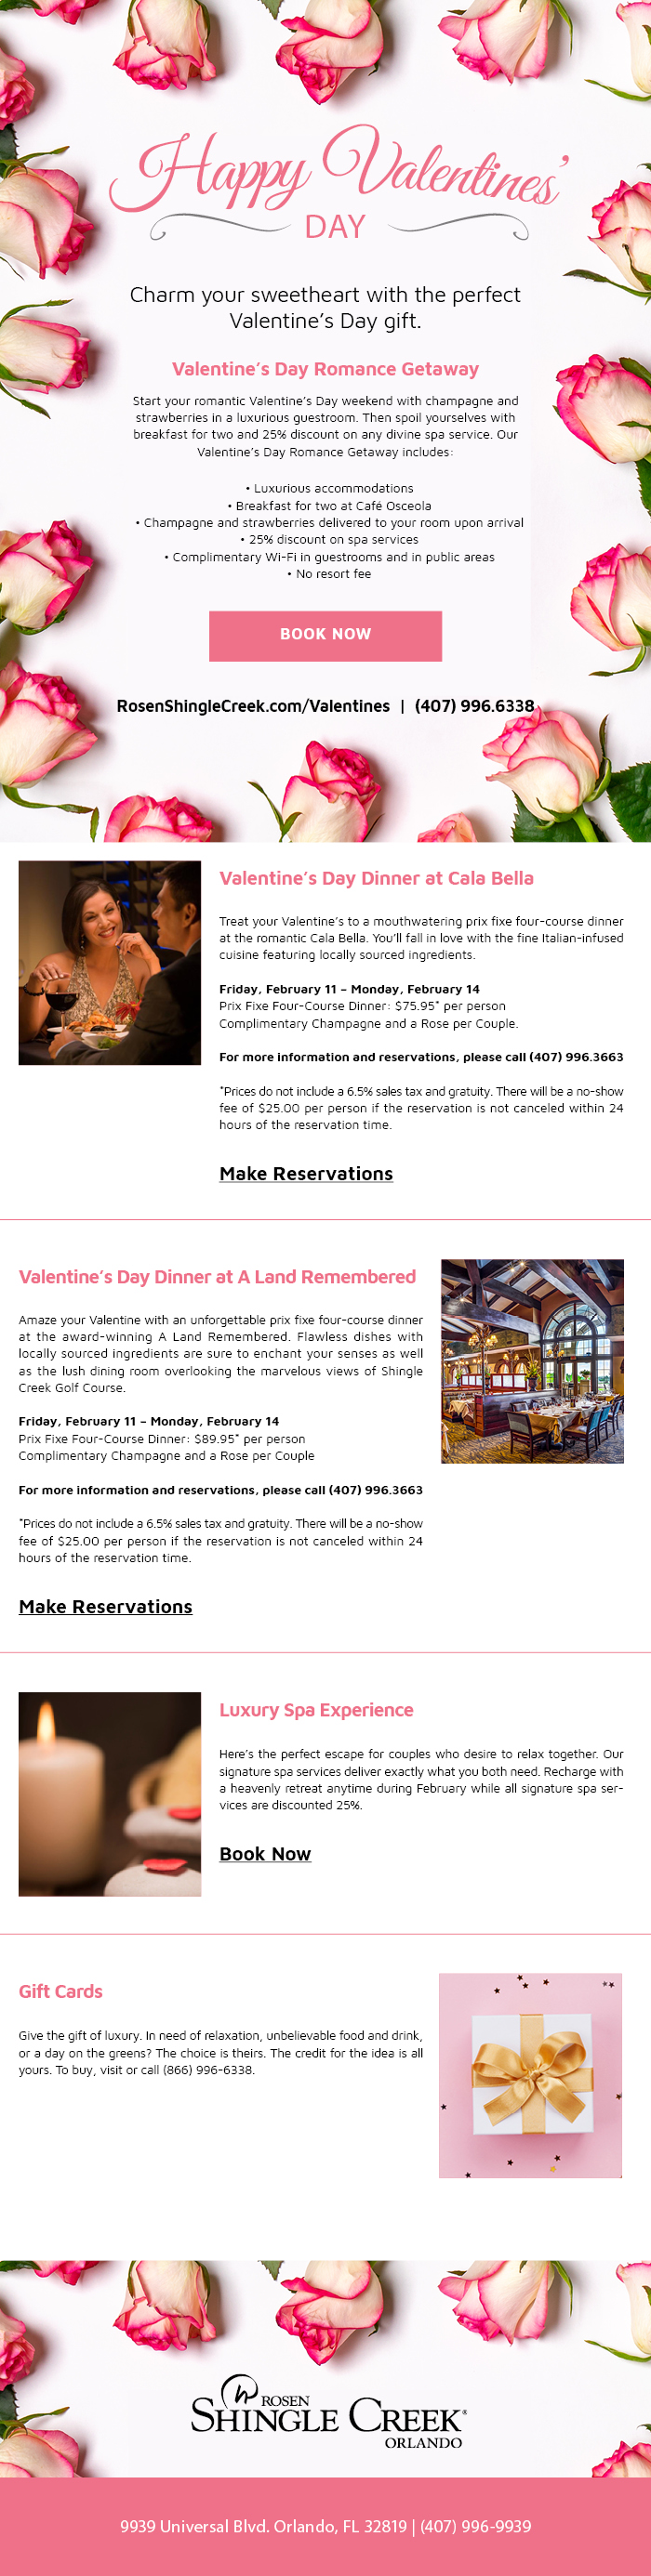 Happy Valentine's Day
		  
Charm your sweetheart with the perfect Valentine’s Day gift.
		  
Valentine’s Day Romance Getaway

Start your romantic Valentine’s Day weekend with champagne and strawberries in a luxurious guestroom. Then spoil yourselves with breakfast for two and 25% discount on any divine spa service. Our Valentine’s Day Romance Getaway includes:
		  
Luxurious accommodations
Breakfast for two at Café Osceola
Champagne and strawberries delivered to your room upon arrival
25% discount on spa services
Complimentary Wi-Fi in guestrooms and in public areas
No resort fee
		  
----
		  
Valentine’s Day Dinner at Cala Bella
		  
Treat your Valentine’s to mouthwatering prix fixe four-course dinner at the romantic Cala Bella. You’ll fall in love with the fine Italian-infused cuisine featuring locally sourced ingredients.

Friday, February 11 – Monday, February 14
Prix Fixe Four-Course Dinner: $75.95* per person
Complimentary Champagne and a Rose per Couple.

For more information and reservations, please call (407) 996.3663

*Prices do not include a 6.5% sales tax and gratuity. There will be a no-show fee of $25.00 per person if the reservation is not canceled within 24 hours of the reservation time. 


Make Reservations
		  
----
		  
Valentine’s Day Dinner at A Land Remembered
		  		  
Amaze your Valentine with an unforgettable prix fixe four-course dinner at the award-winning A Land Remembered. Flawless dishes with locally sourced ingredients are sure to enchant your senses as well as the lush dining room overlooking the marvelous views of Shingle Creek Golf Course.

Friday, February 11 – Monday, February 14
Prix Fixe Four-Course Dinner: $89.95* per person
Complimentary Champagne and a Rose per Couple

For more information and reservations, please call (407) 996.3663

*Prices do not include a 6.5% sales tax and gratuity. There will be a no-show fee of $25.00 per person if the reservation is not canceled within 24 hours of the reservation time.

Make Reservations
		  
----
		  
Luxury Spa Experience
		  
Here’s the perfect escape for couples who desire to relax together. Our signature spa services deliver exactly what you both need. Recharge with a heavenly retreat anytime during February while all signature spa services are discounted 25%.


Book Now
		  
----
		  
Gift Cards
		  
Give the gift of luxury. In need of relaxation, unbelievable food and drink, or a day on the greens? The choice is theirs. The credit for the idea is all yours. To buy, visit or call (866) 996-6338.
		  
9939 Universal Blvd. Orlando, FL 32819 | (407) 996-9939